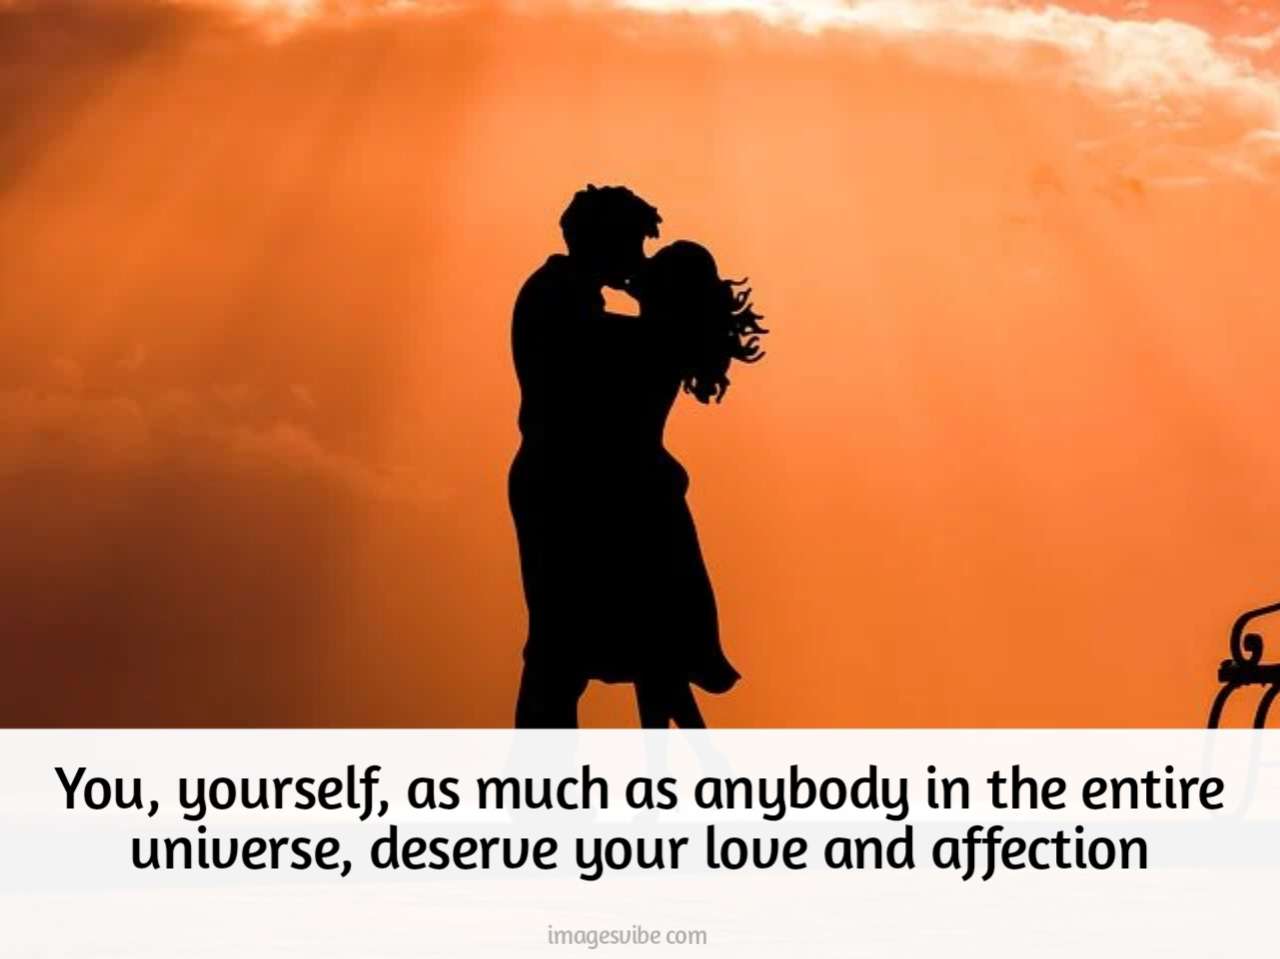 Romantic Images With Quotes19 